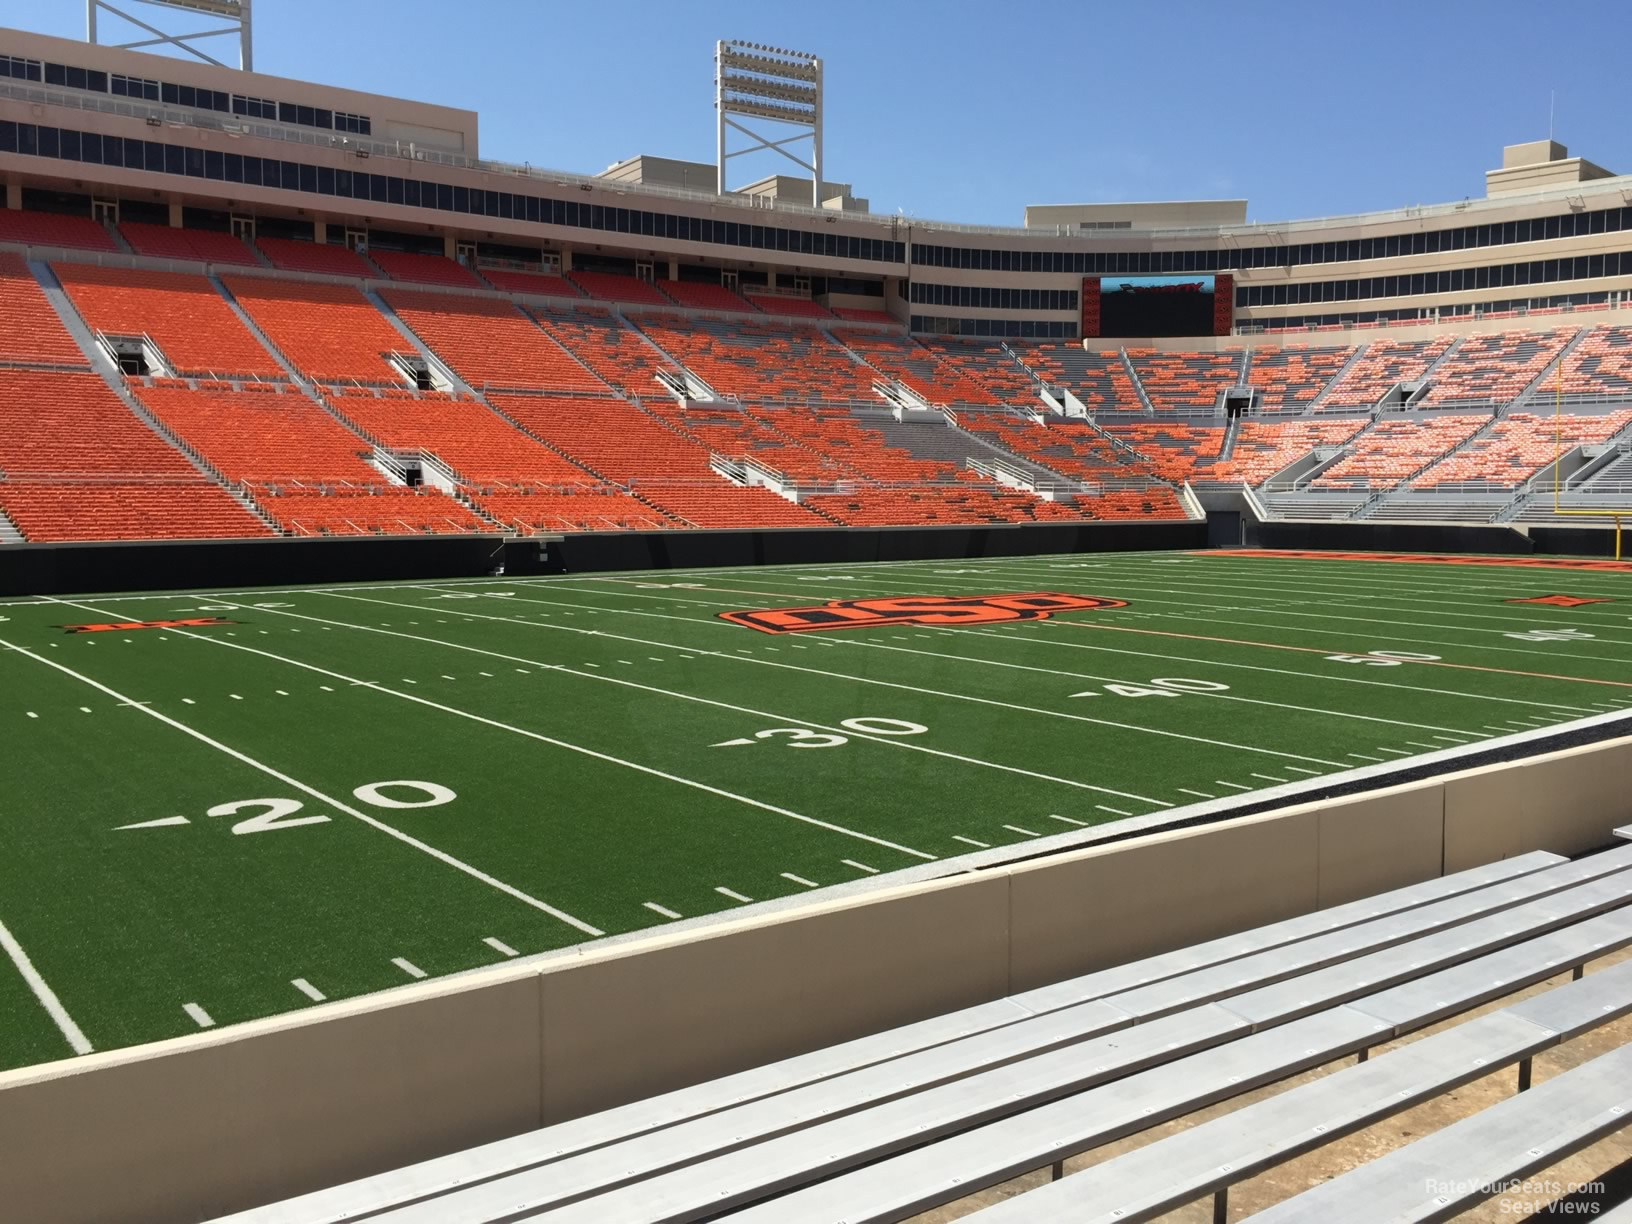 section 119, row 10 seat view  - boone pickens stadium